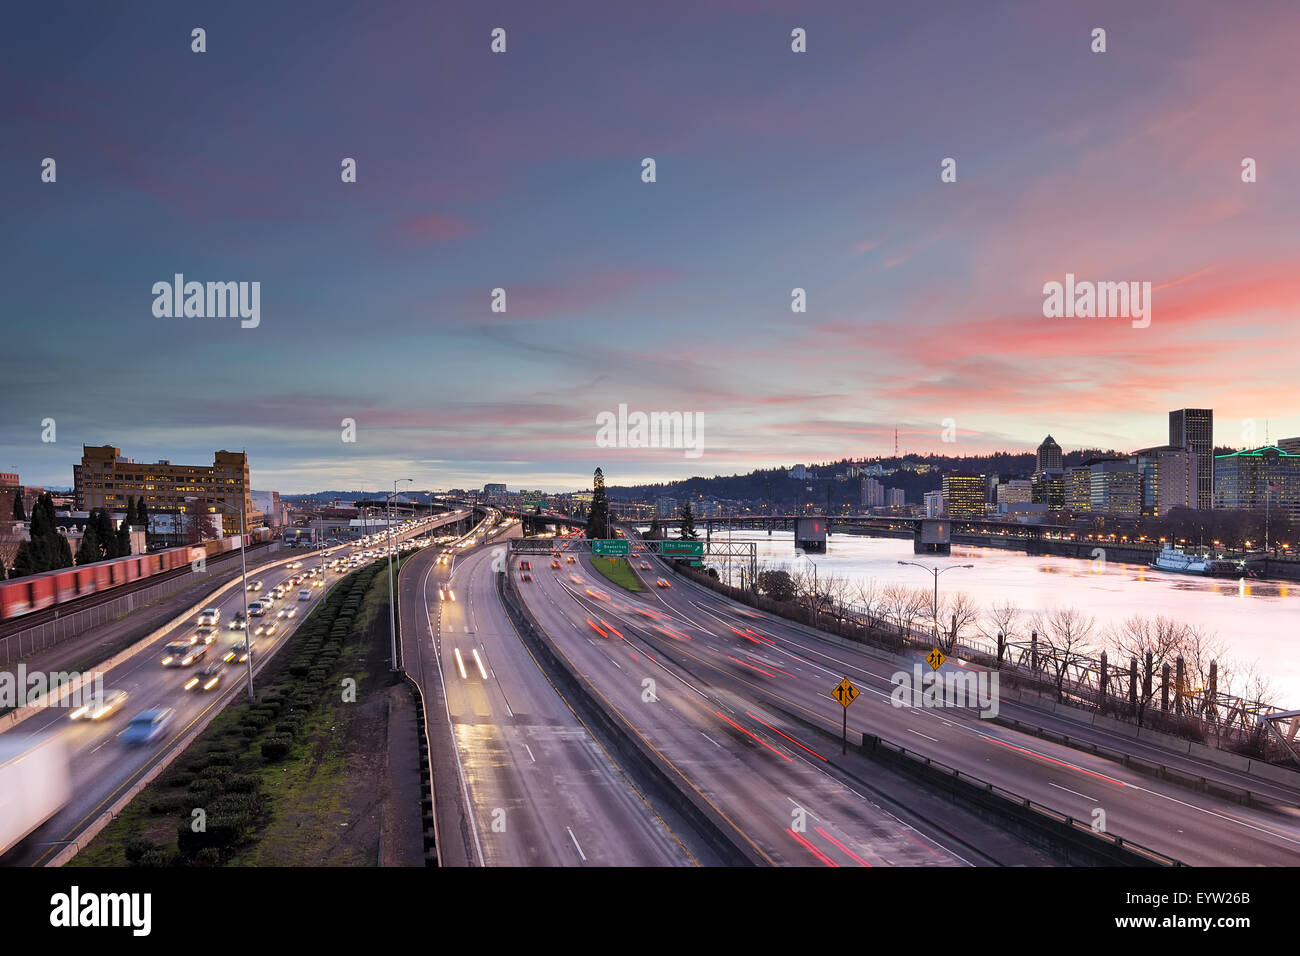 Portland Oregon rush hour traffic with city skyline along Interstate freeway during sunset evening Stock Photo